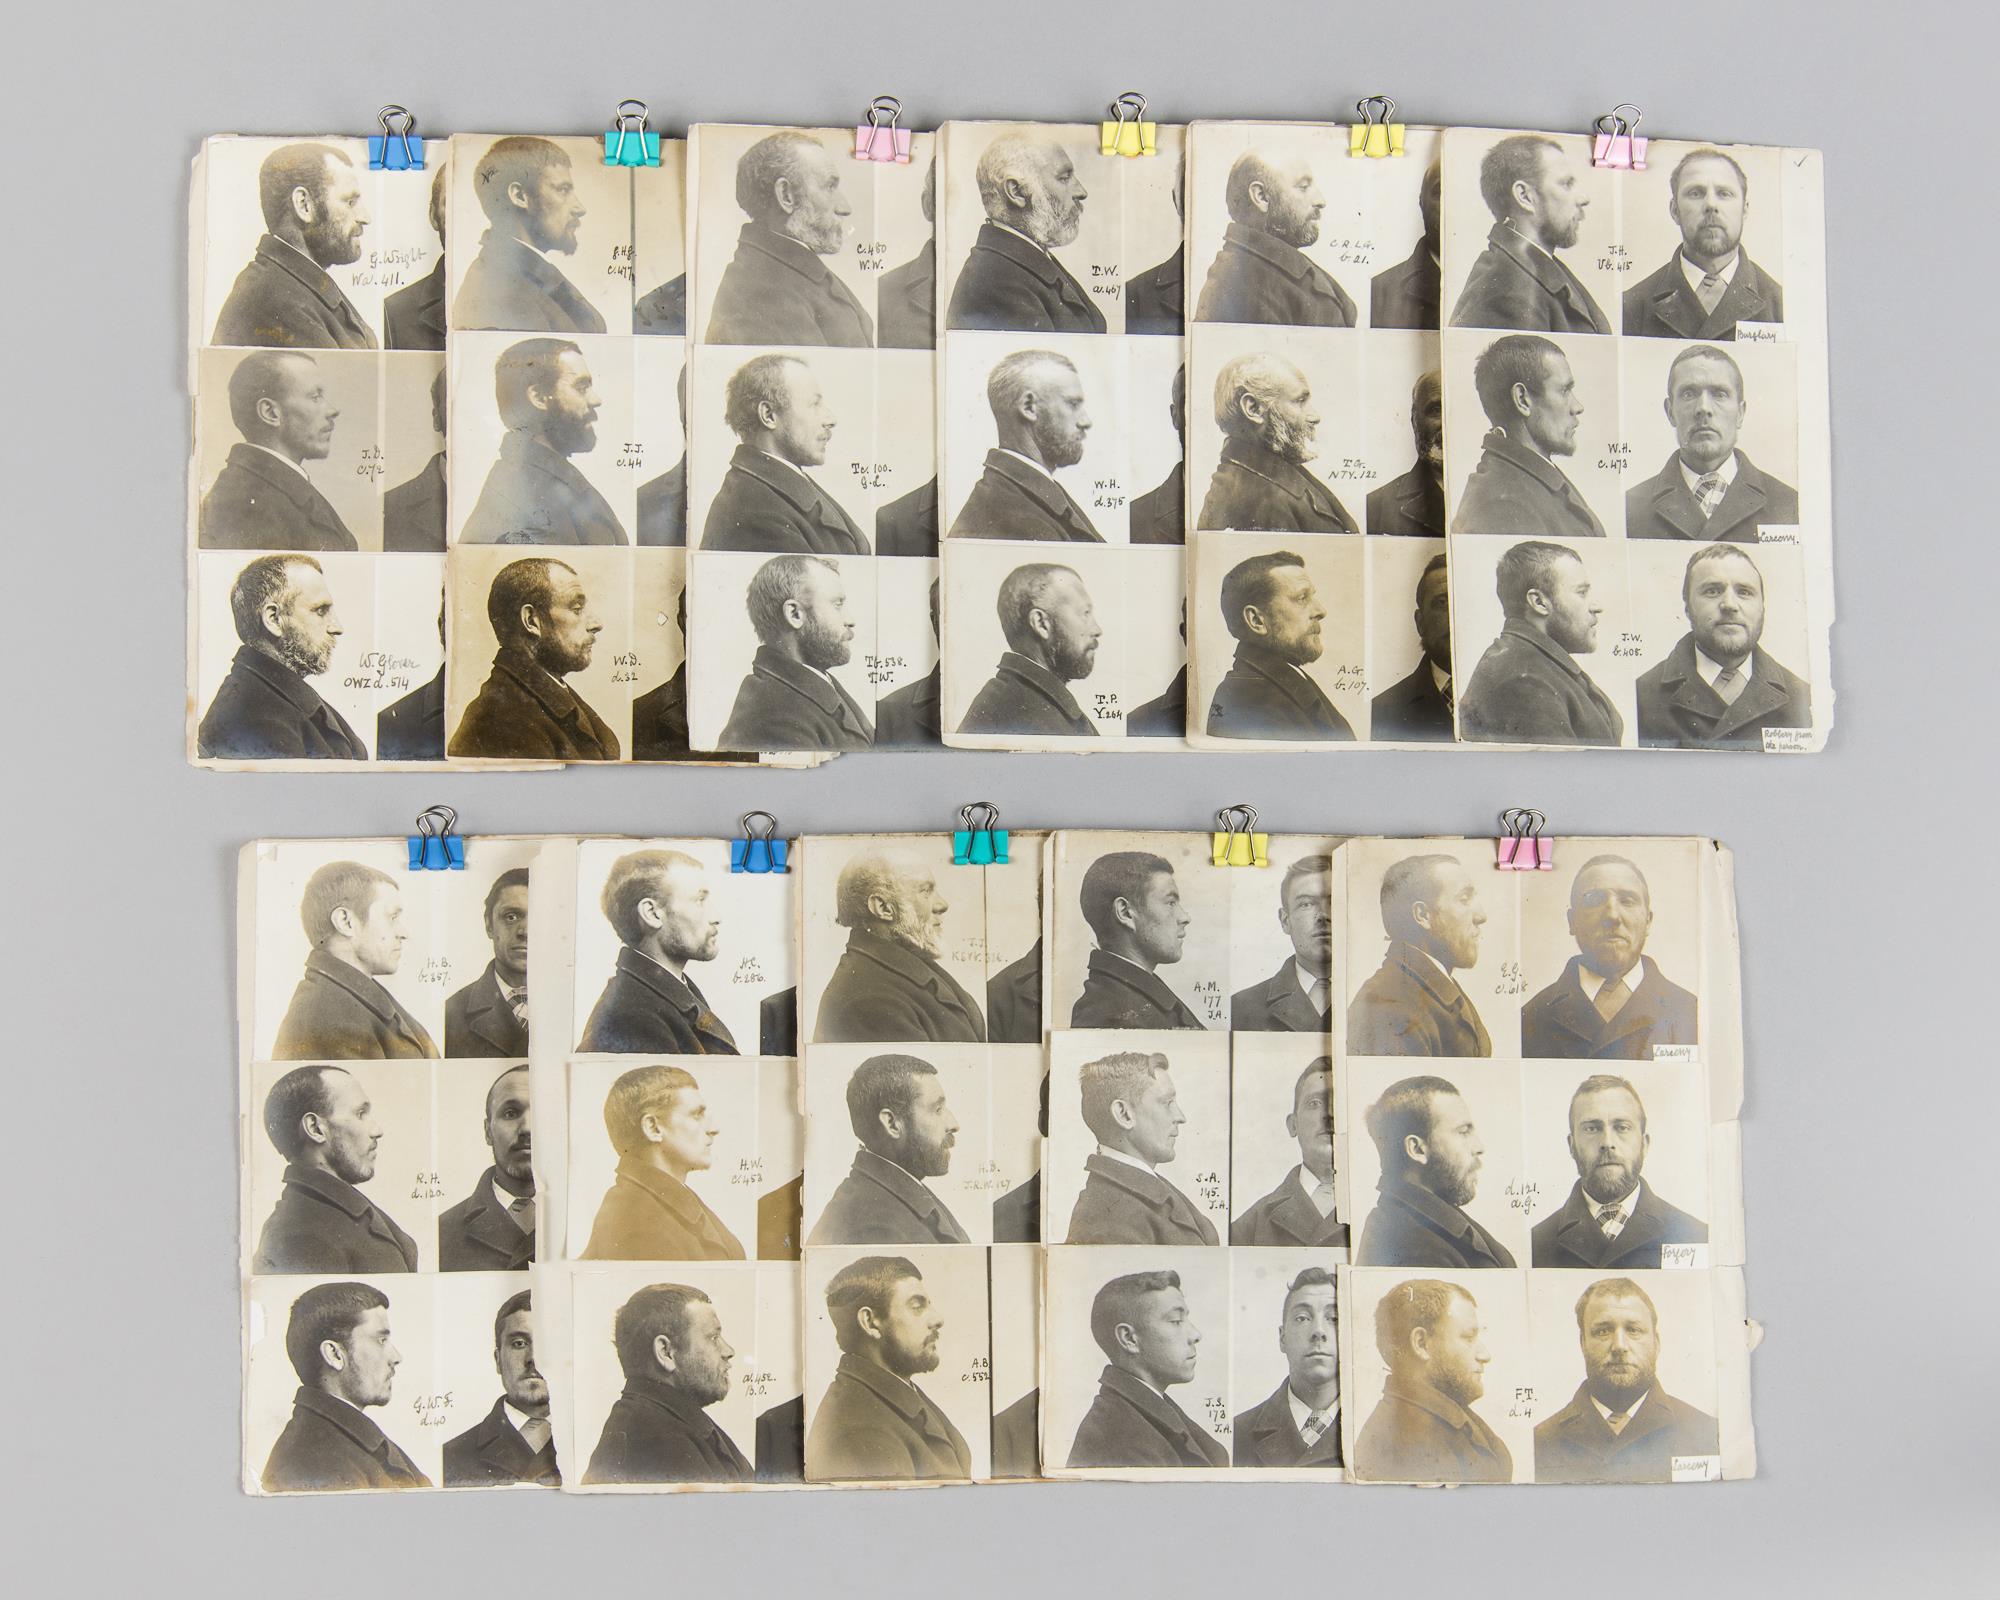 A RARE LATE 19TH CENTURY GROUP OF SIXTY-SIX MUGSHOT PHOTOGRAPHS. The very scarce group of sixty